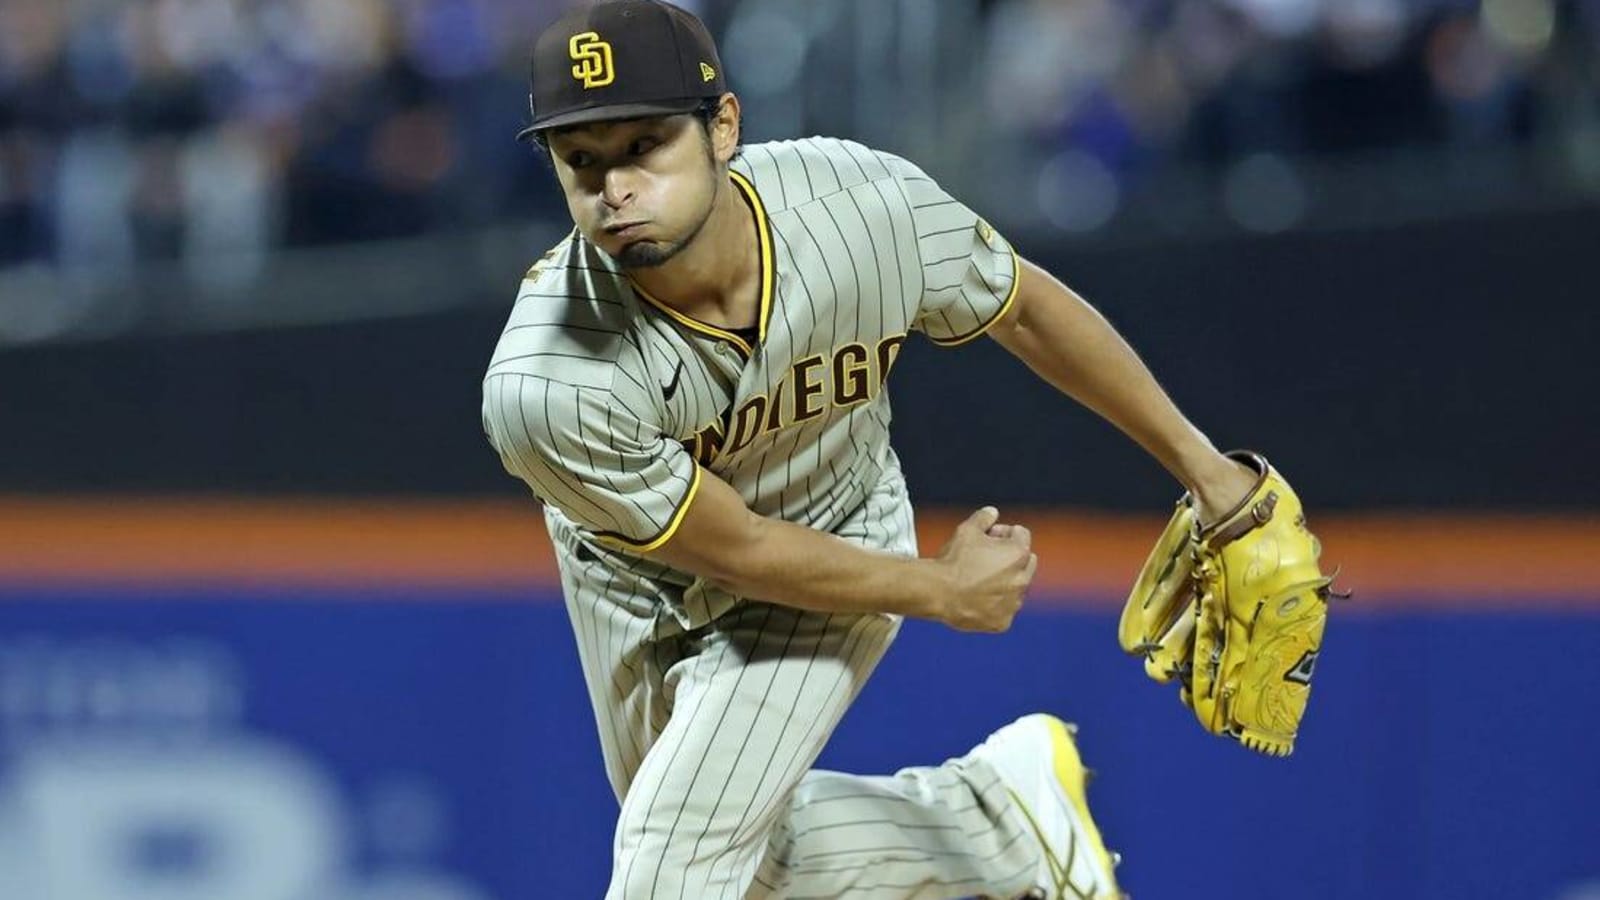 San Diego Padres vs. Los Angeles Dodgers prediction, pick, odds: Padres aim to bounce back behind Yu Darvish